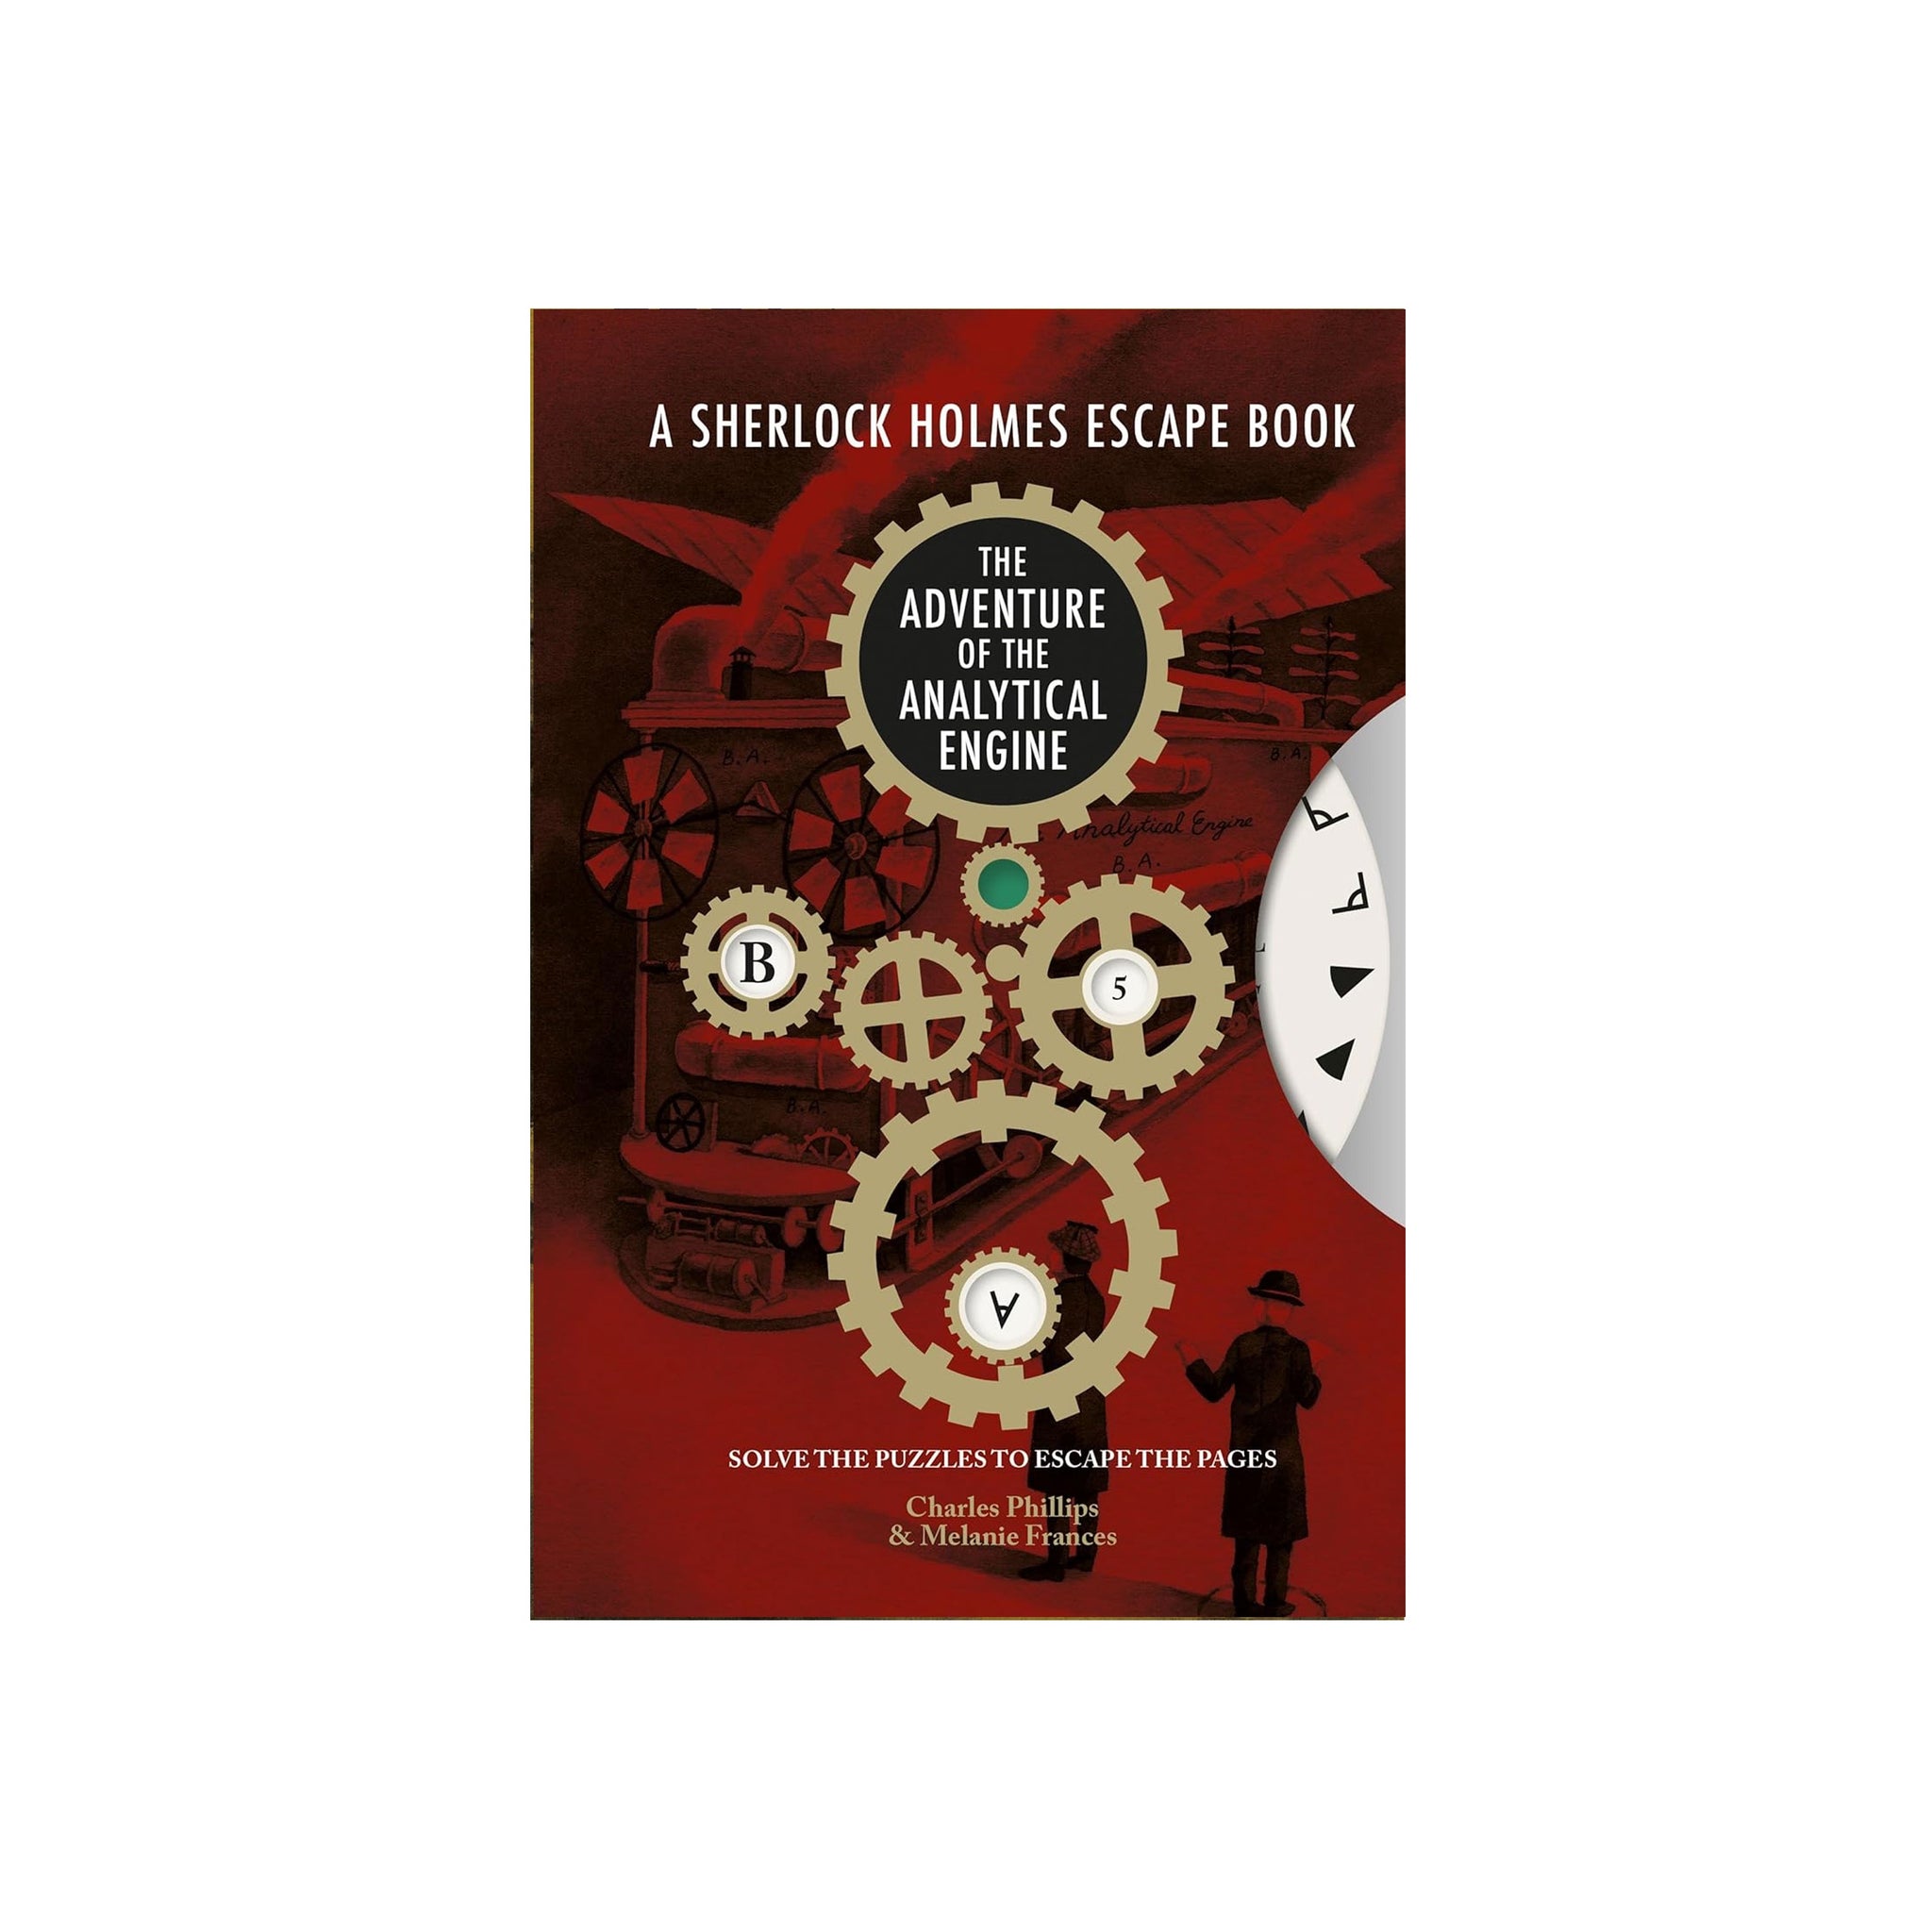 A Sherlock Holmes Escape Book: The Adventure of the Analytical Engine